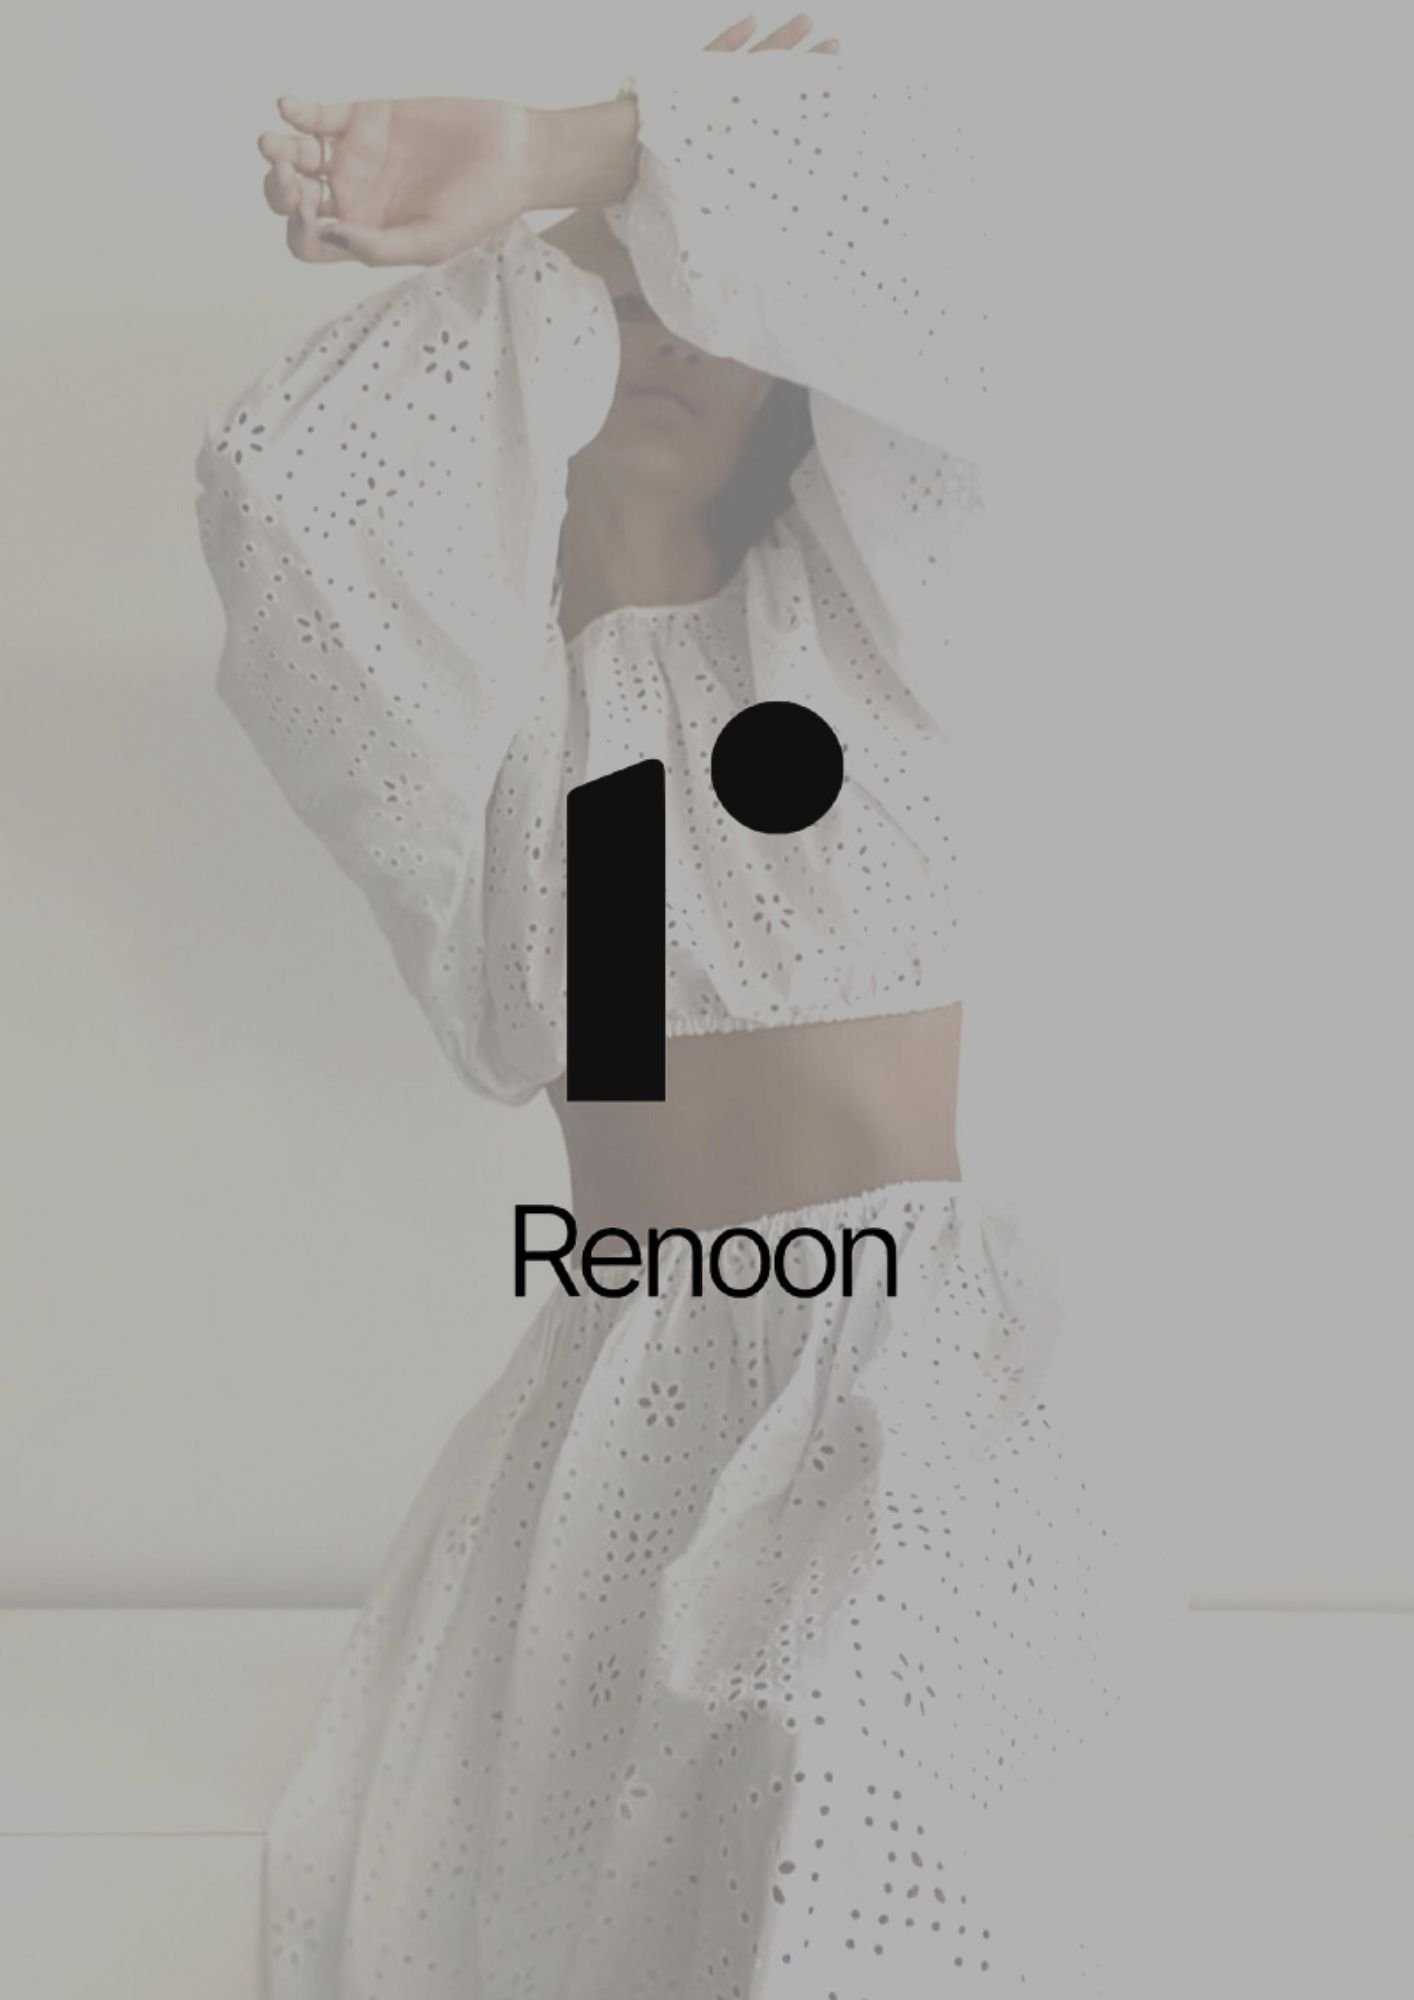 Renoon Day8 – Meet the ecosystem around sustainability &amp; fashion (Copy)